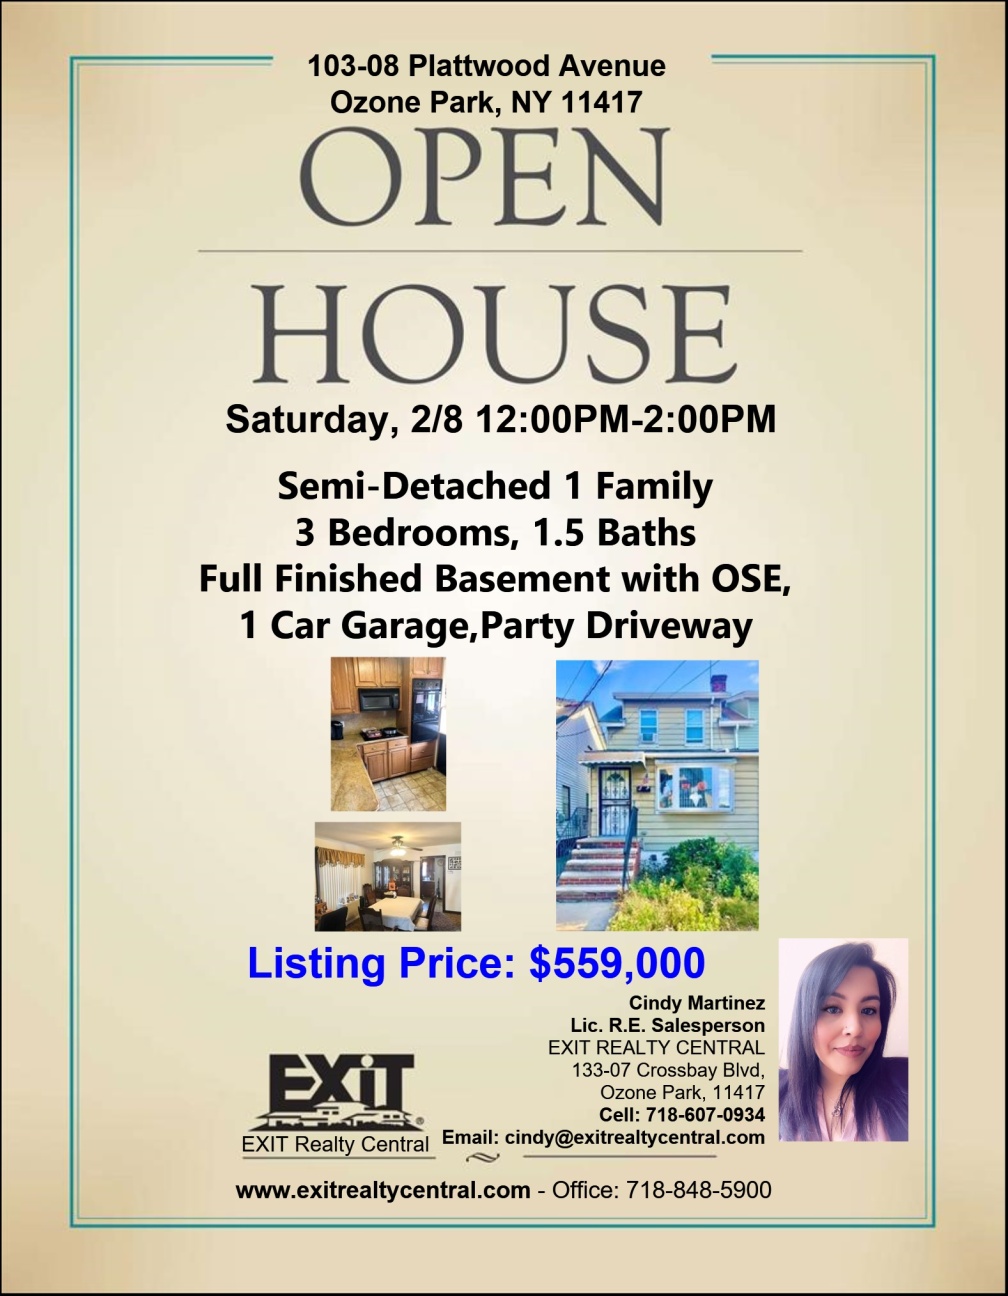 Open House in Ozone Park 2/8 12-2pm